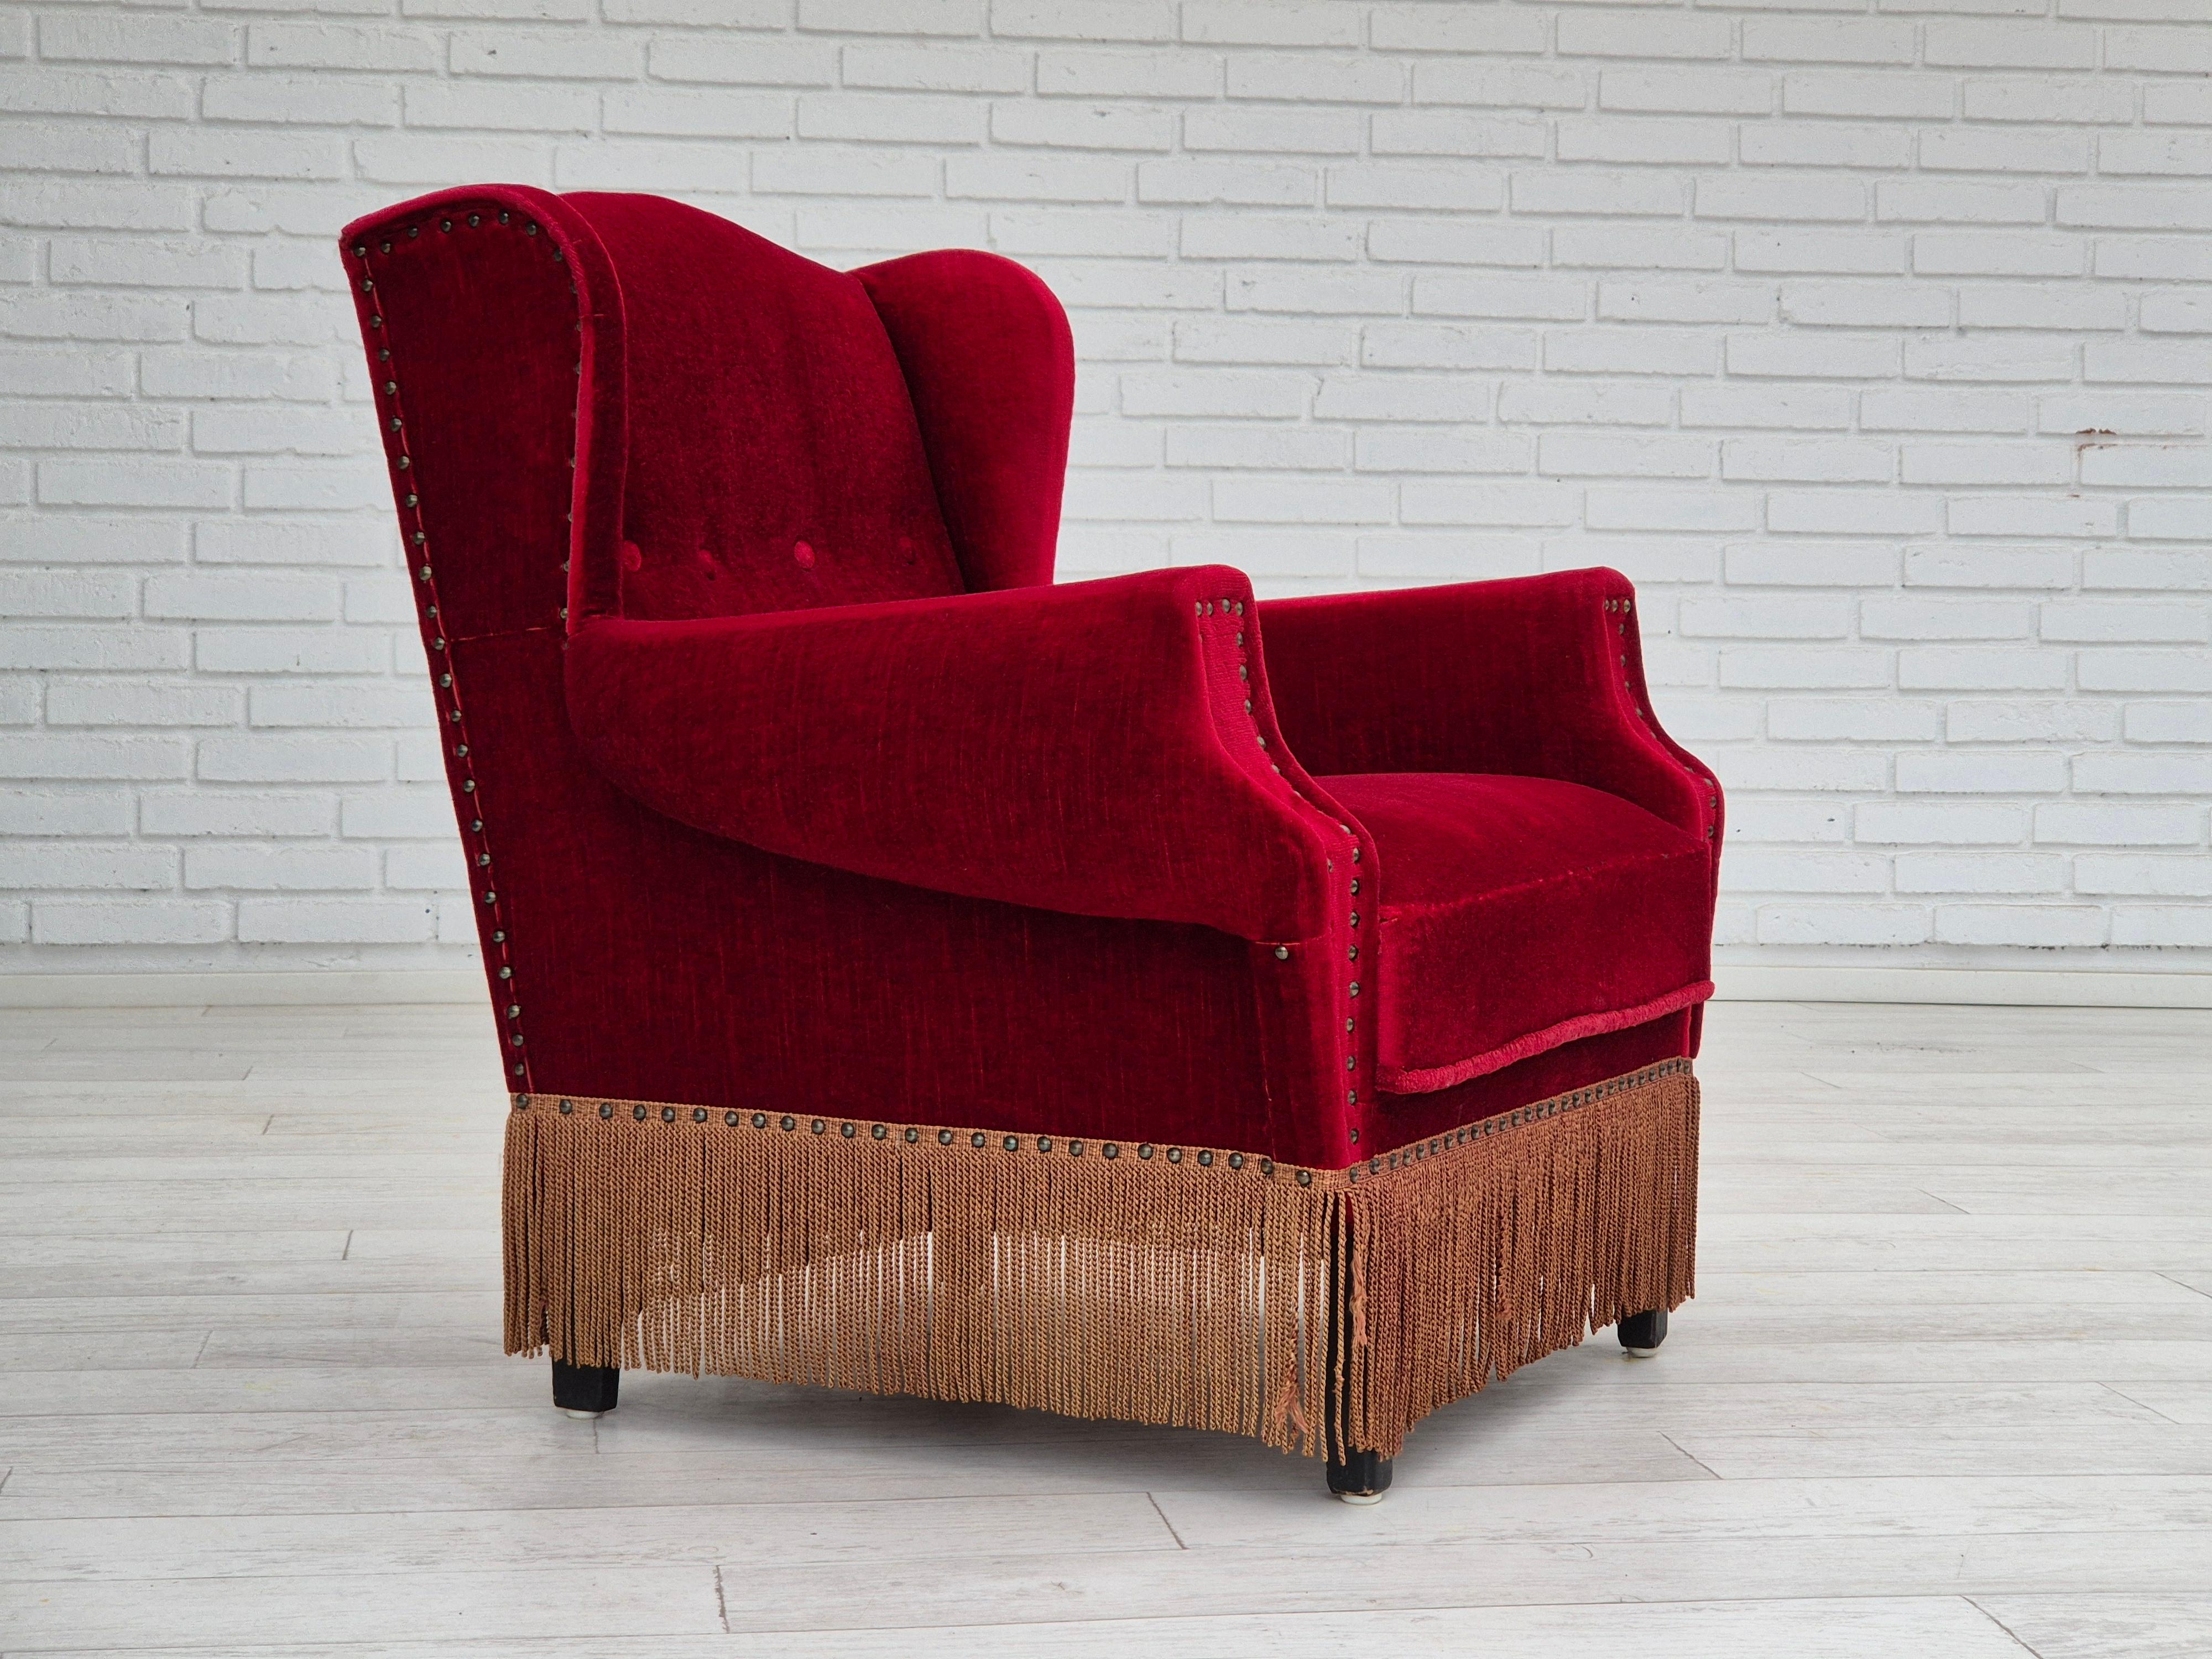 1960s, Danish lounge chair in original very good condition: no smells and no stains. Cherry-red furniture velour, oak wood legs. Springs in the seat. Manufactured by Danish furniture manufacturer in about 1960s.